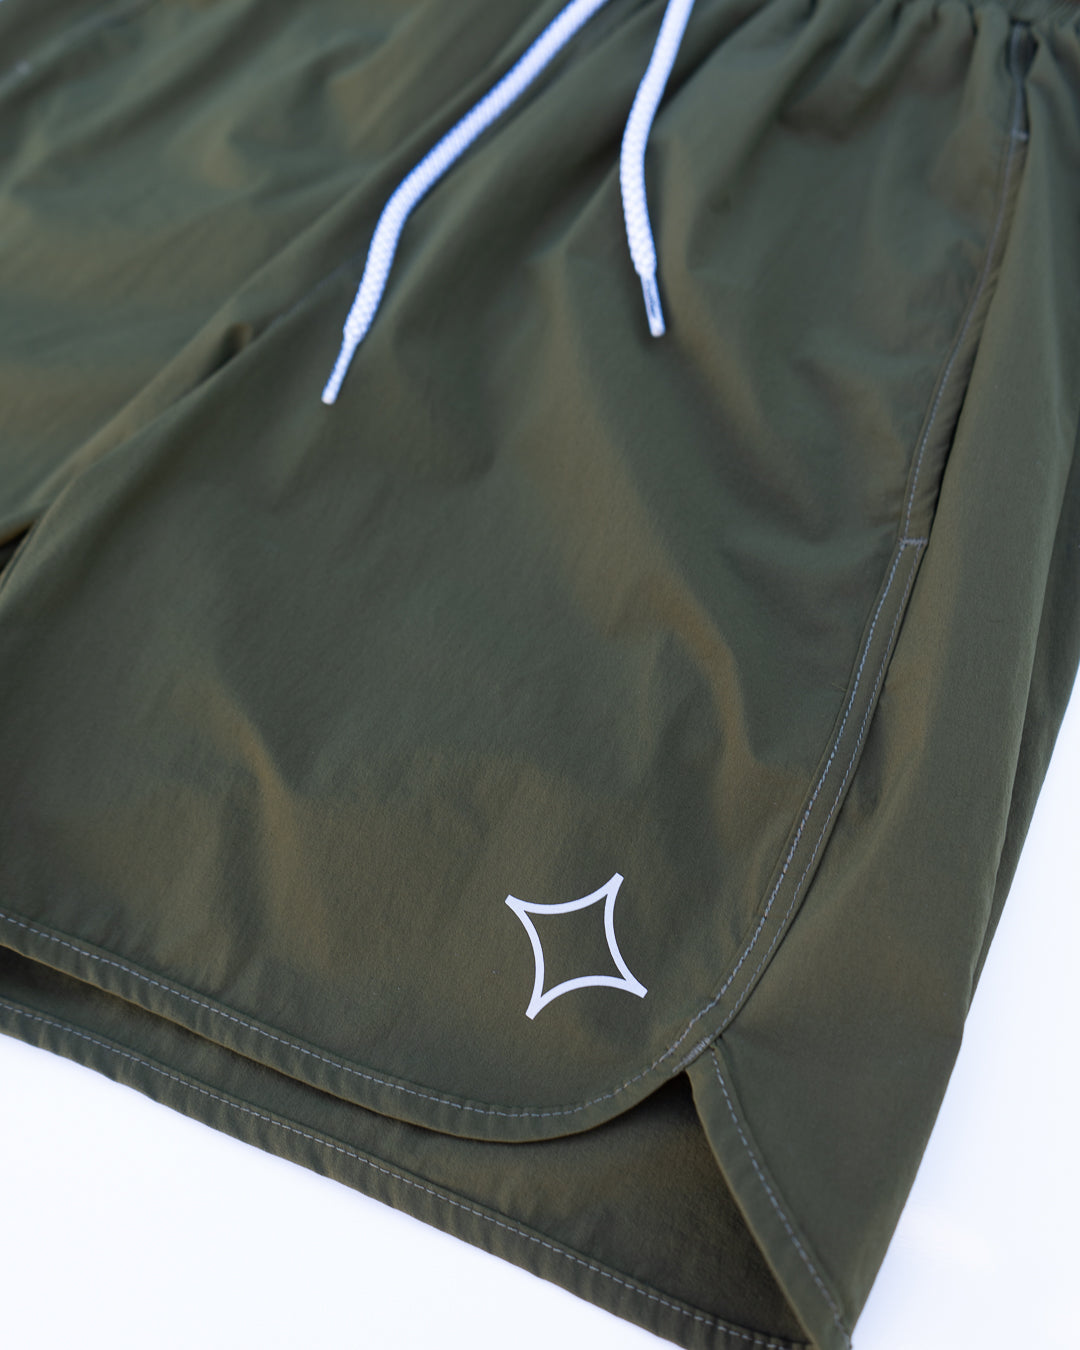 Refined Active Shorts (Olive)